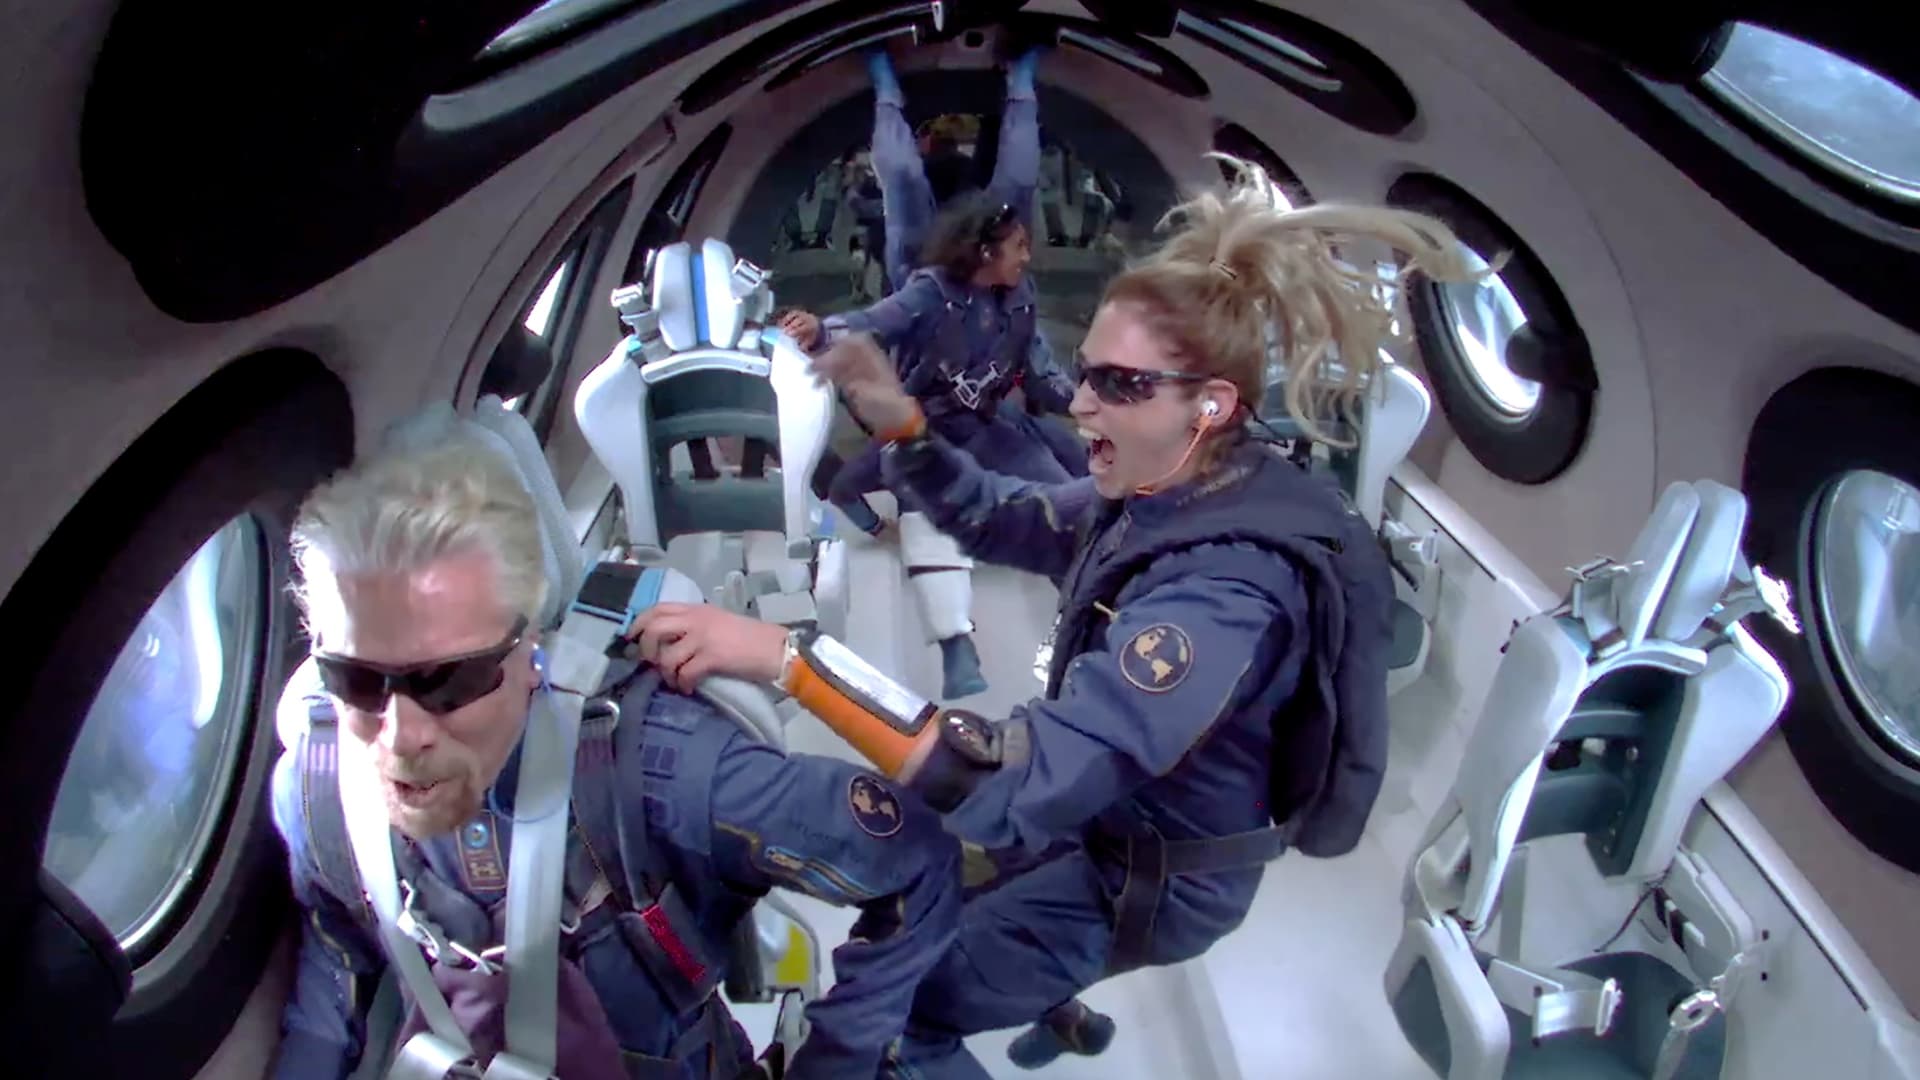 Billionaire Richard Branson makes a statement as crew members Beth Moses and Sirisha Bandla float in zero gravity on board Virgin Galactic's passenger rocket plane VSS Unity after reaching the edge of space above Spaceport America near Truth or Consequences, New Mexico, U.S. July 11, 2021 in a still image from video.